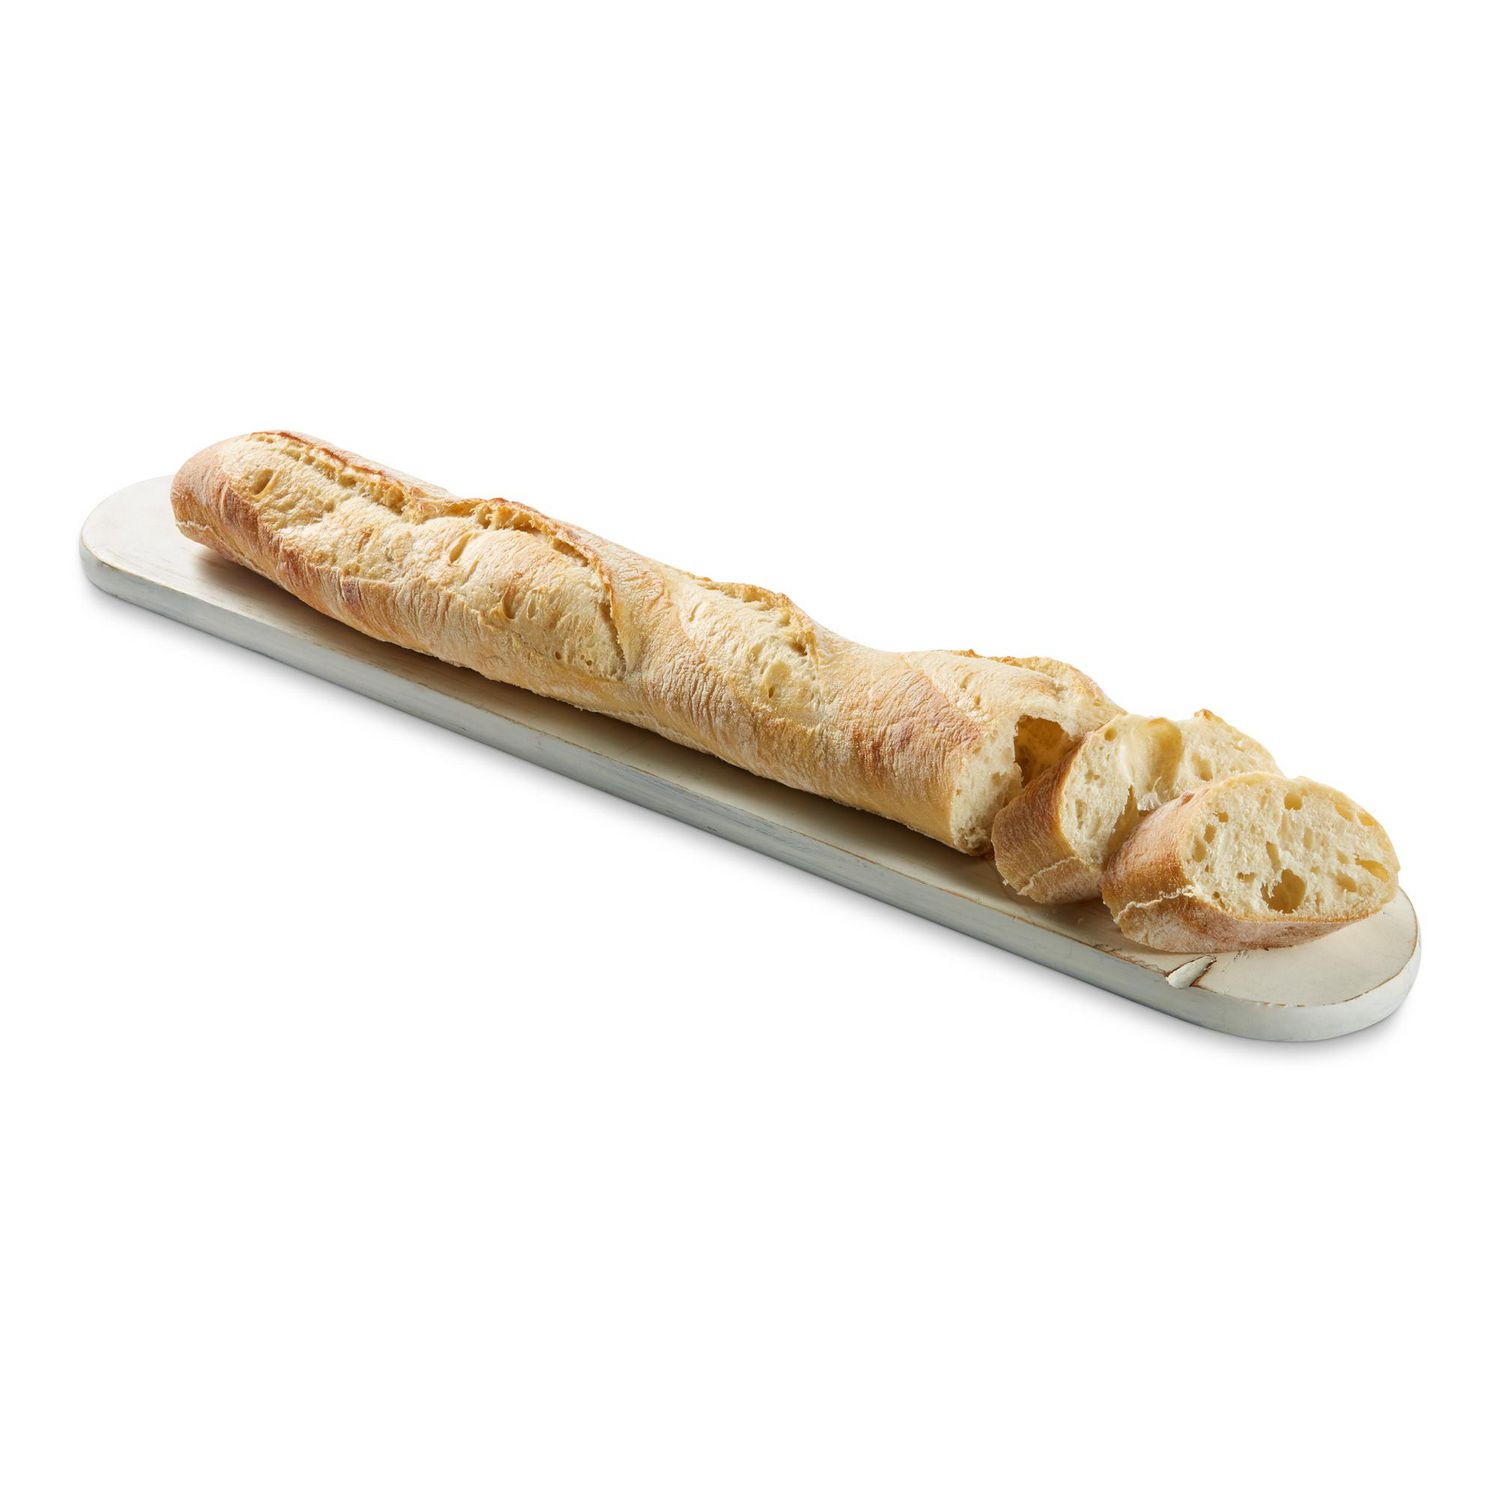 Fashion-hungry? Opt for a Baguette!